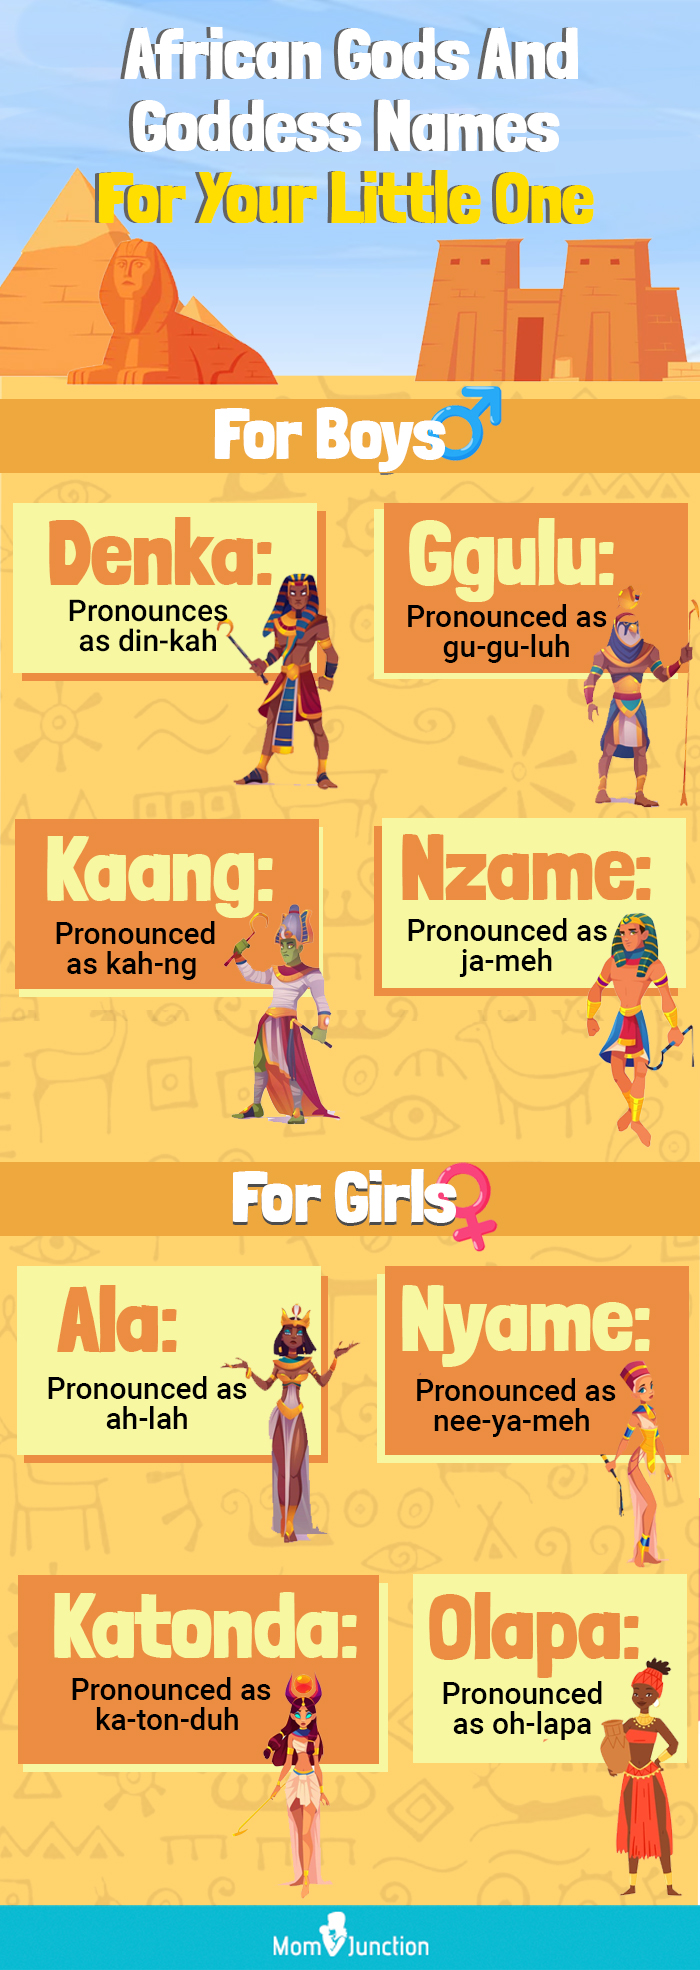 african gods and goddess names for your little one (infographic)